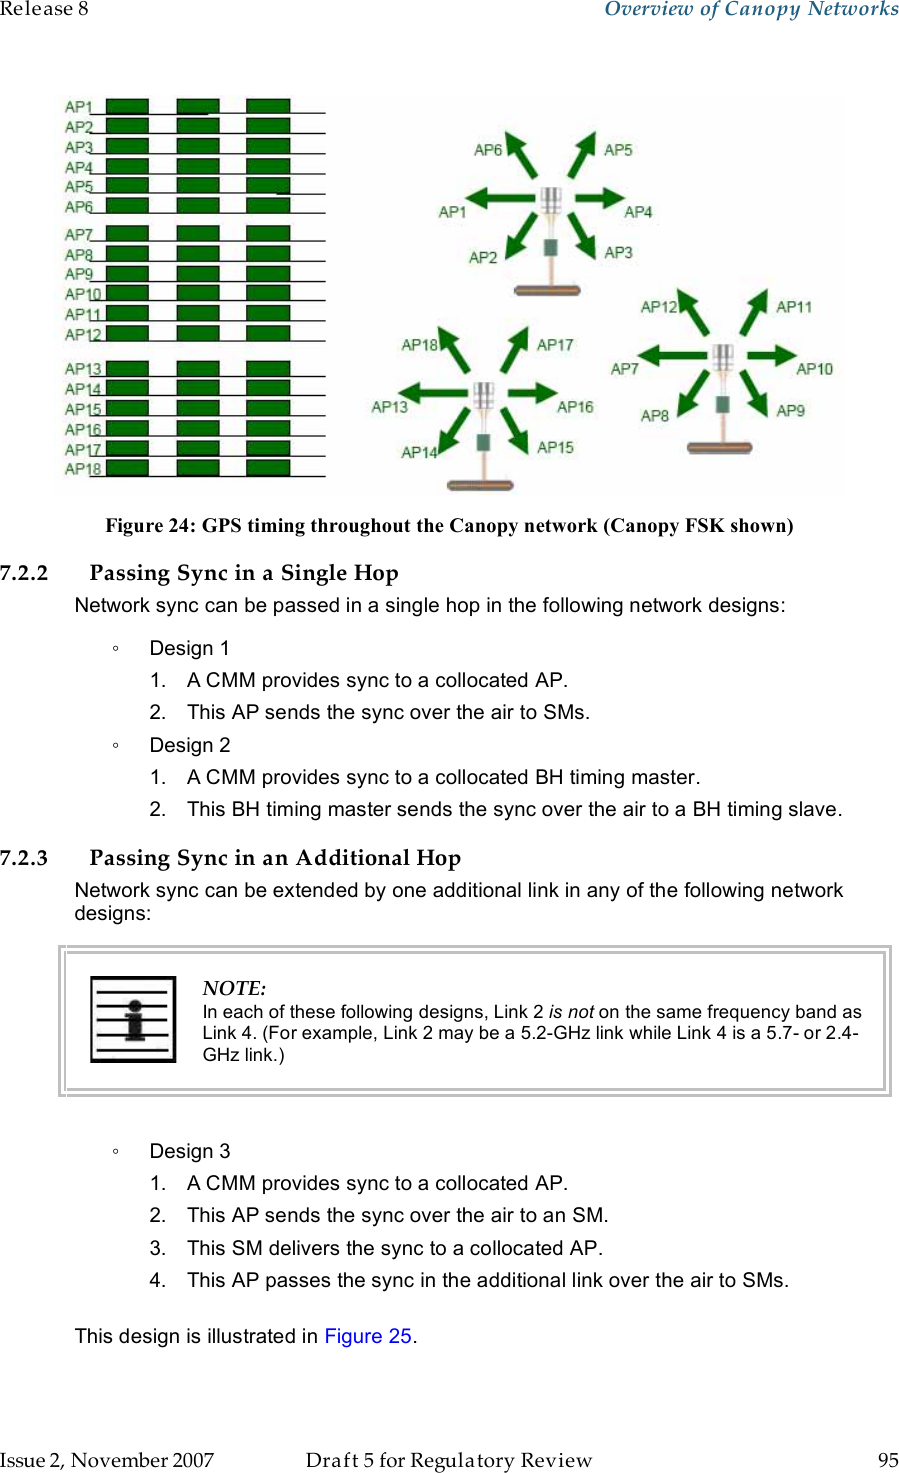 Release 8    Overview of Canopy Networks                  March 200                  Through Software Release 6.   Issue 2, November 2007  Draft 5 for Regulatory Review  95      Figure 24: GPS timing throughout the Canopy network (Canopy FSK shown) 7.2.2 Passing Sync in a Single Hop Network sync can be passed in a single hop in the following network designs: ◦  Design 1 1.  A CMM provides sync to a collocated AP. 2.  This AP sends the sync over the air to SMs. ◦  Design 2 1.  A CMM provides sync to a collocated BH timing master. 2.  This BH timing master sends the sync over the air to a BH timing slave. 7.2.3 Passing Sync in an Additional Hop Network sync can be extended by one additional link in any of the following network designs:  NOTE: In each of these following designs, Link 2 is not on the same frequency band as Link 4. (For example, Link 2 may be a 5.2-GHz link while Link 4 is a 5.7- or 2.4-GHz link.)  ◦  Design 3 1.  A CMM provides sync to a collocated AP. 2.  This AP sends the sync over the air to an SM. 3.  This SM delivers the sync to a collocated AP. 4.  This AP passes the sync in the additional link over the air to SMs.  This design is illustrated in Figure 25.  